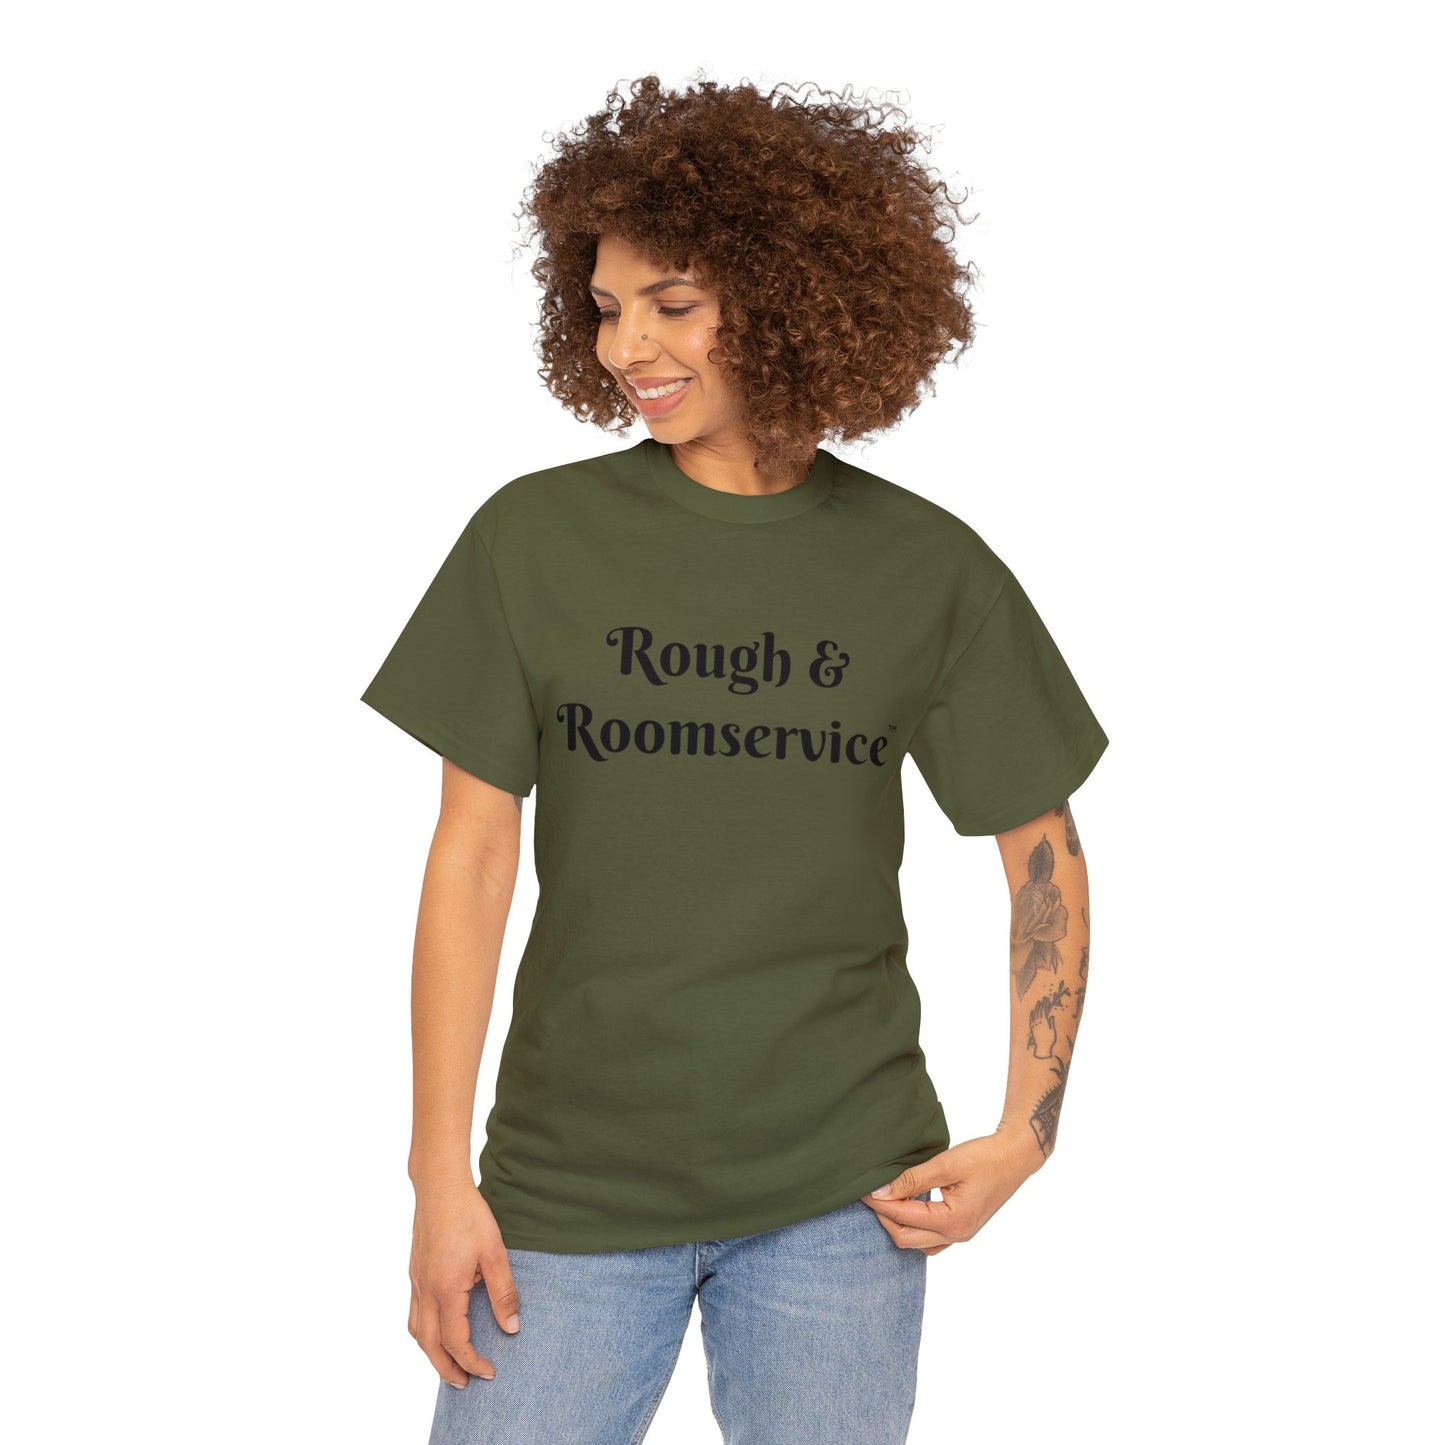 Bargain Tee "Rough & Roomservice"